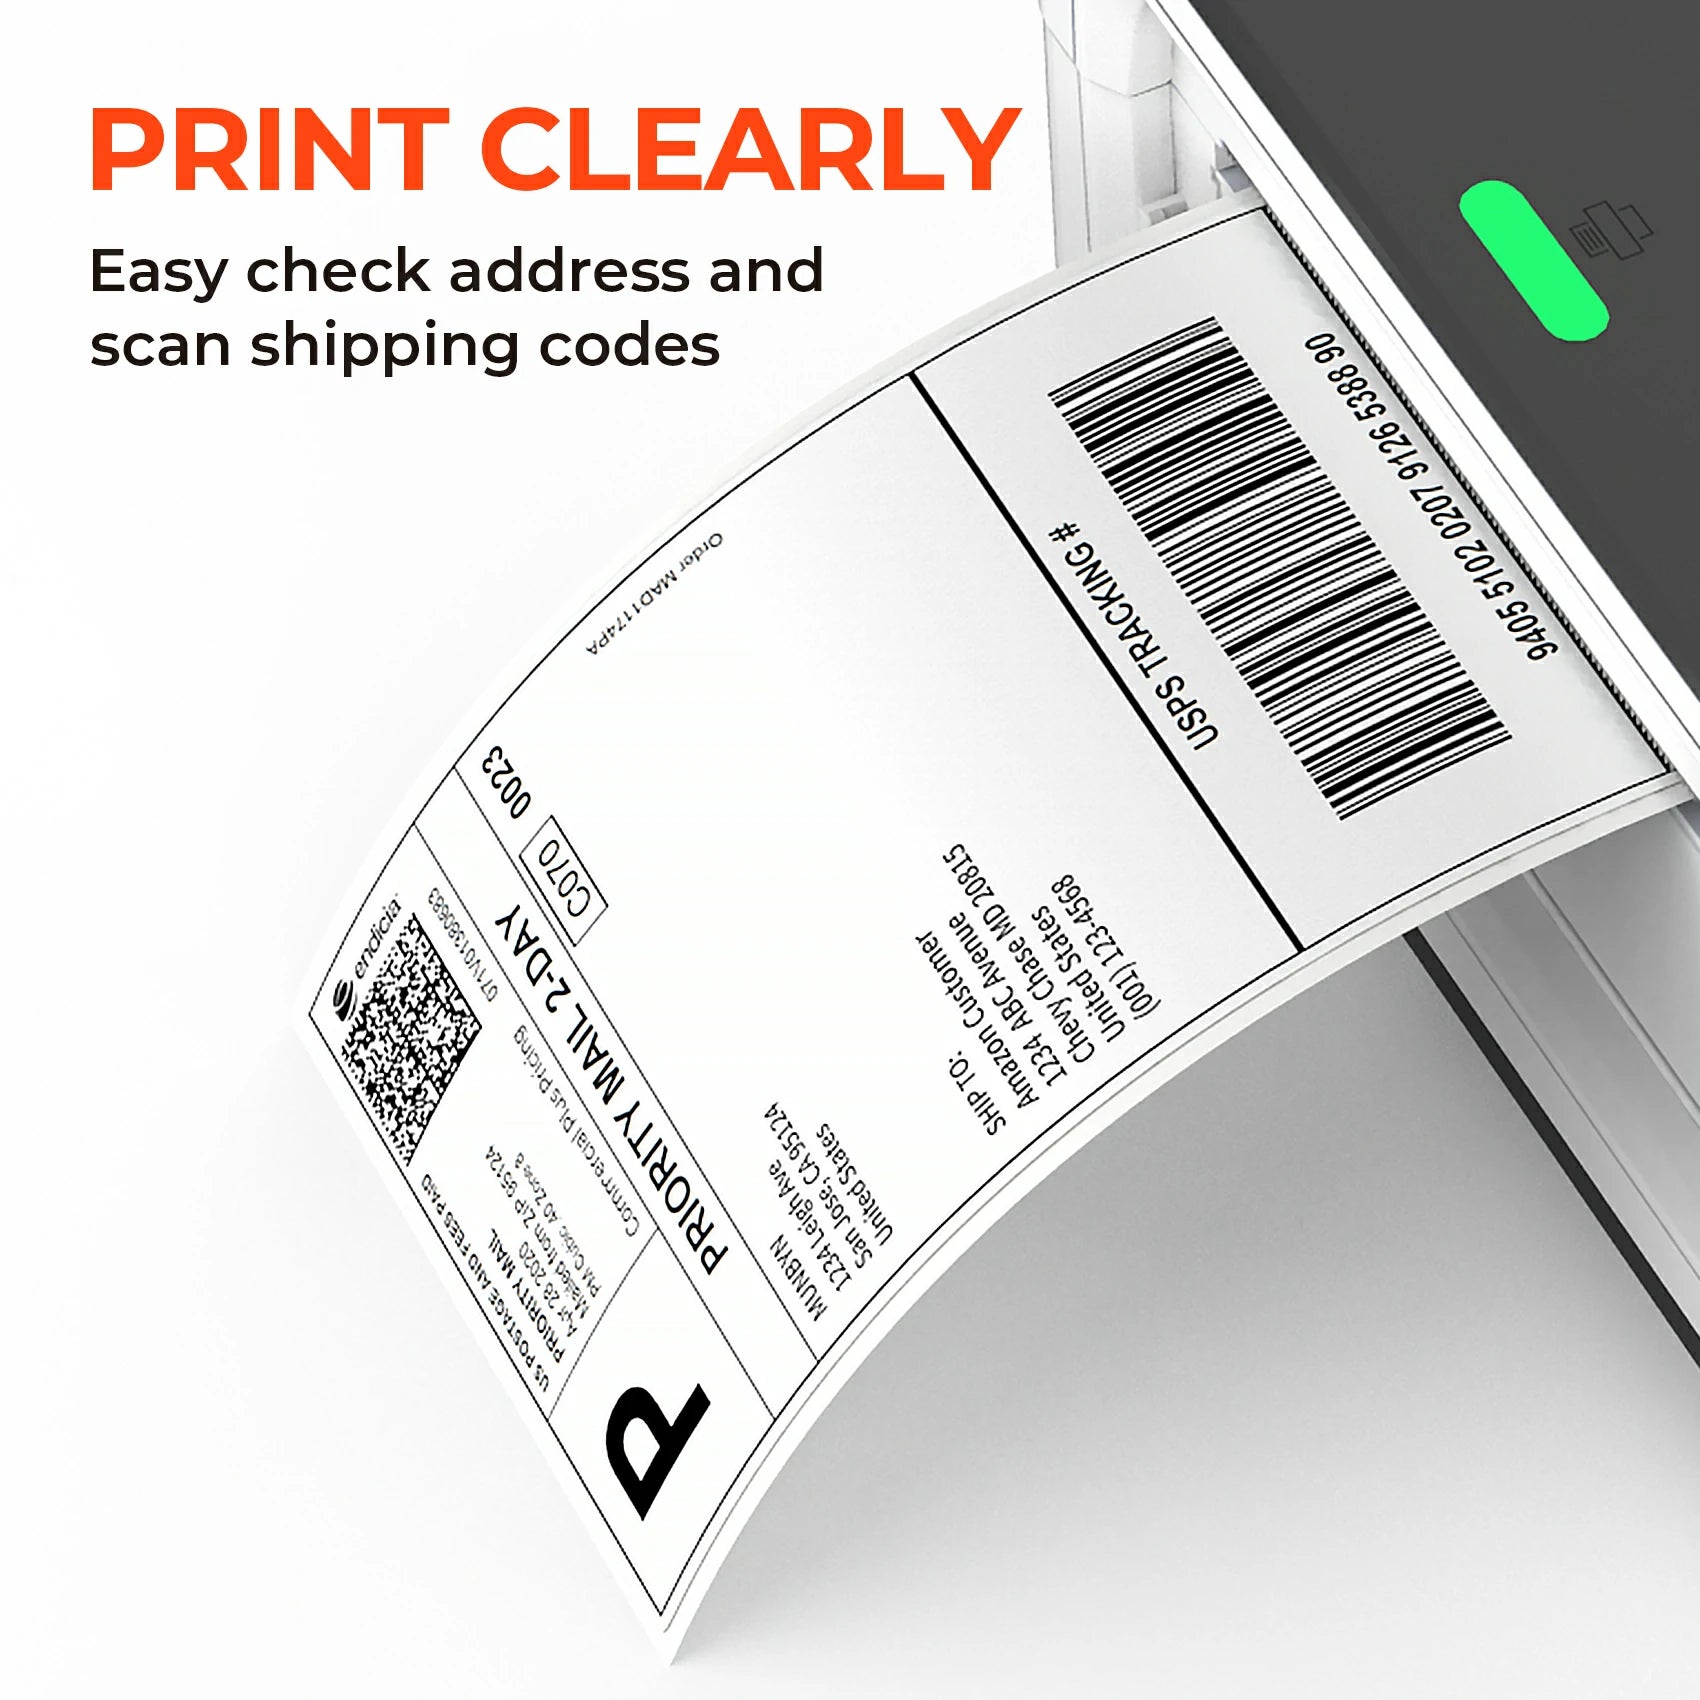 MUNBYN 4x6 thermal labels can print clear images and bar codes.